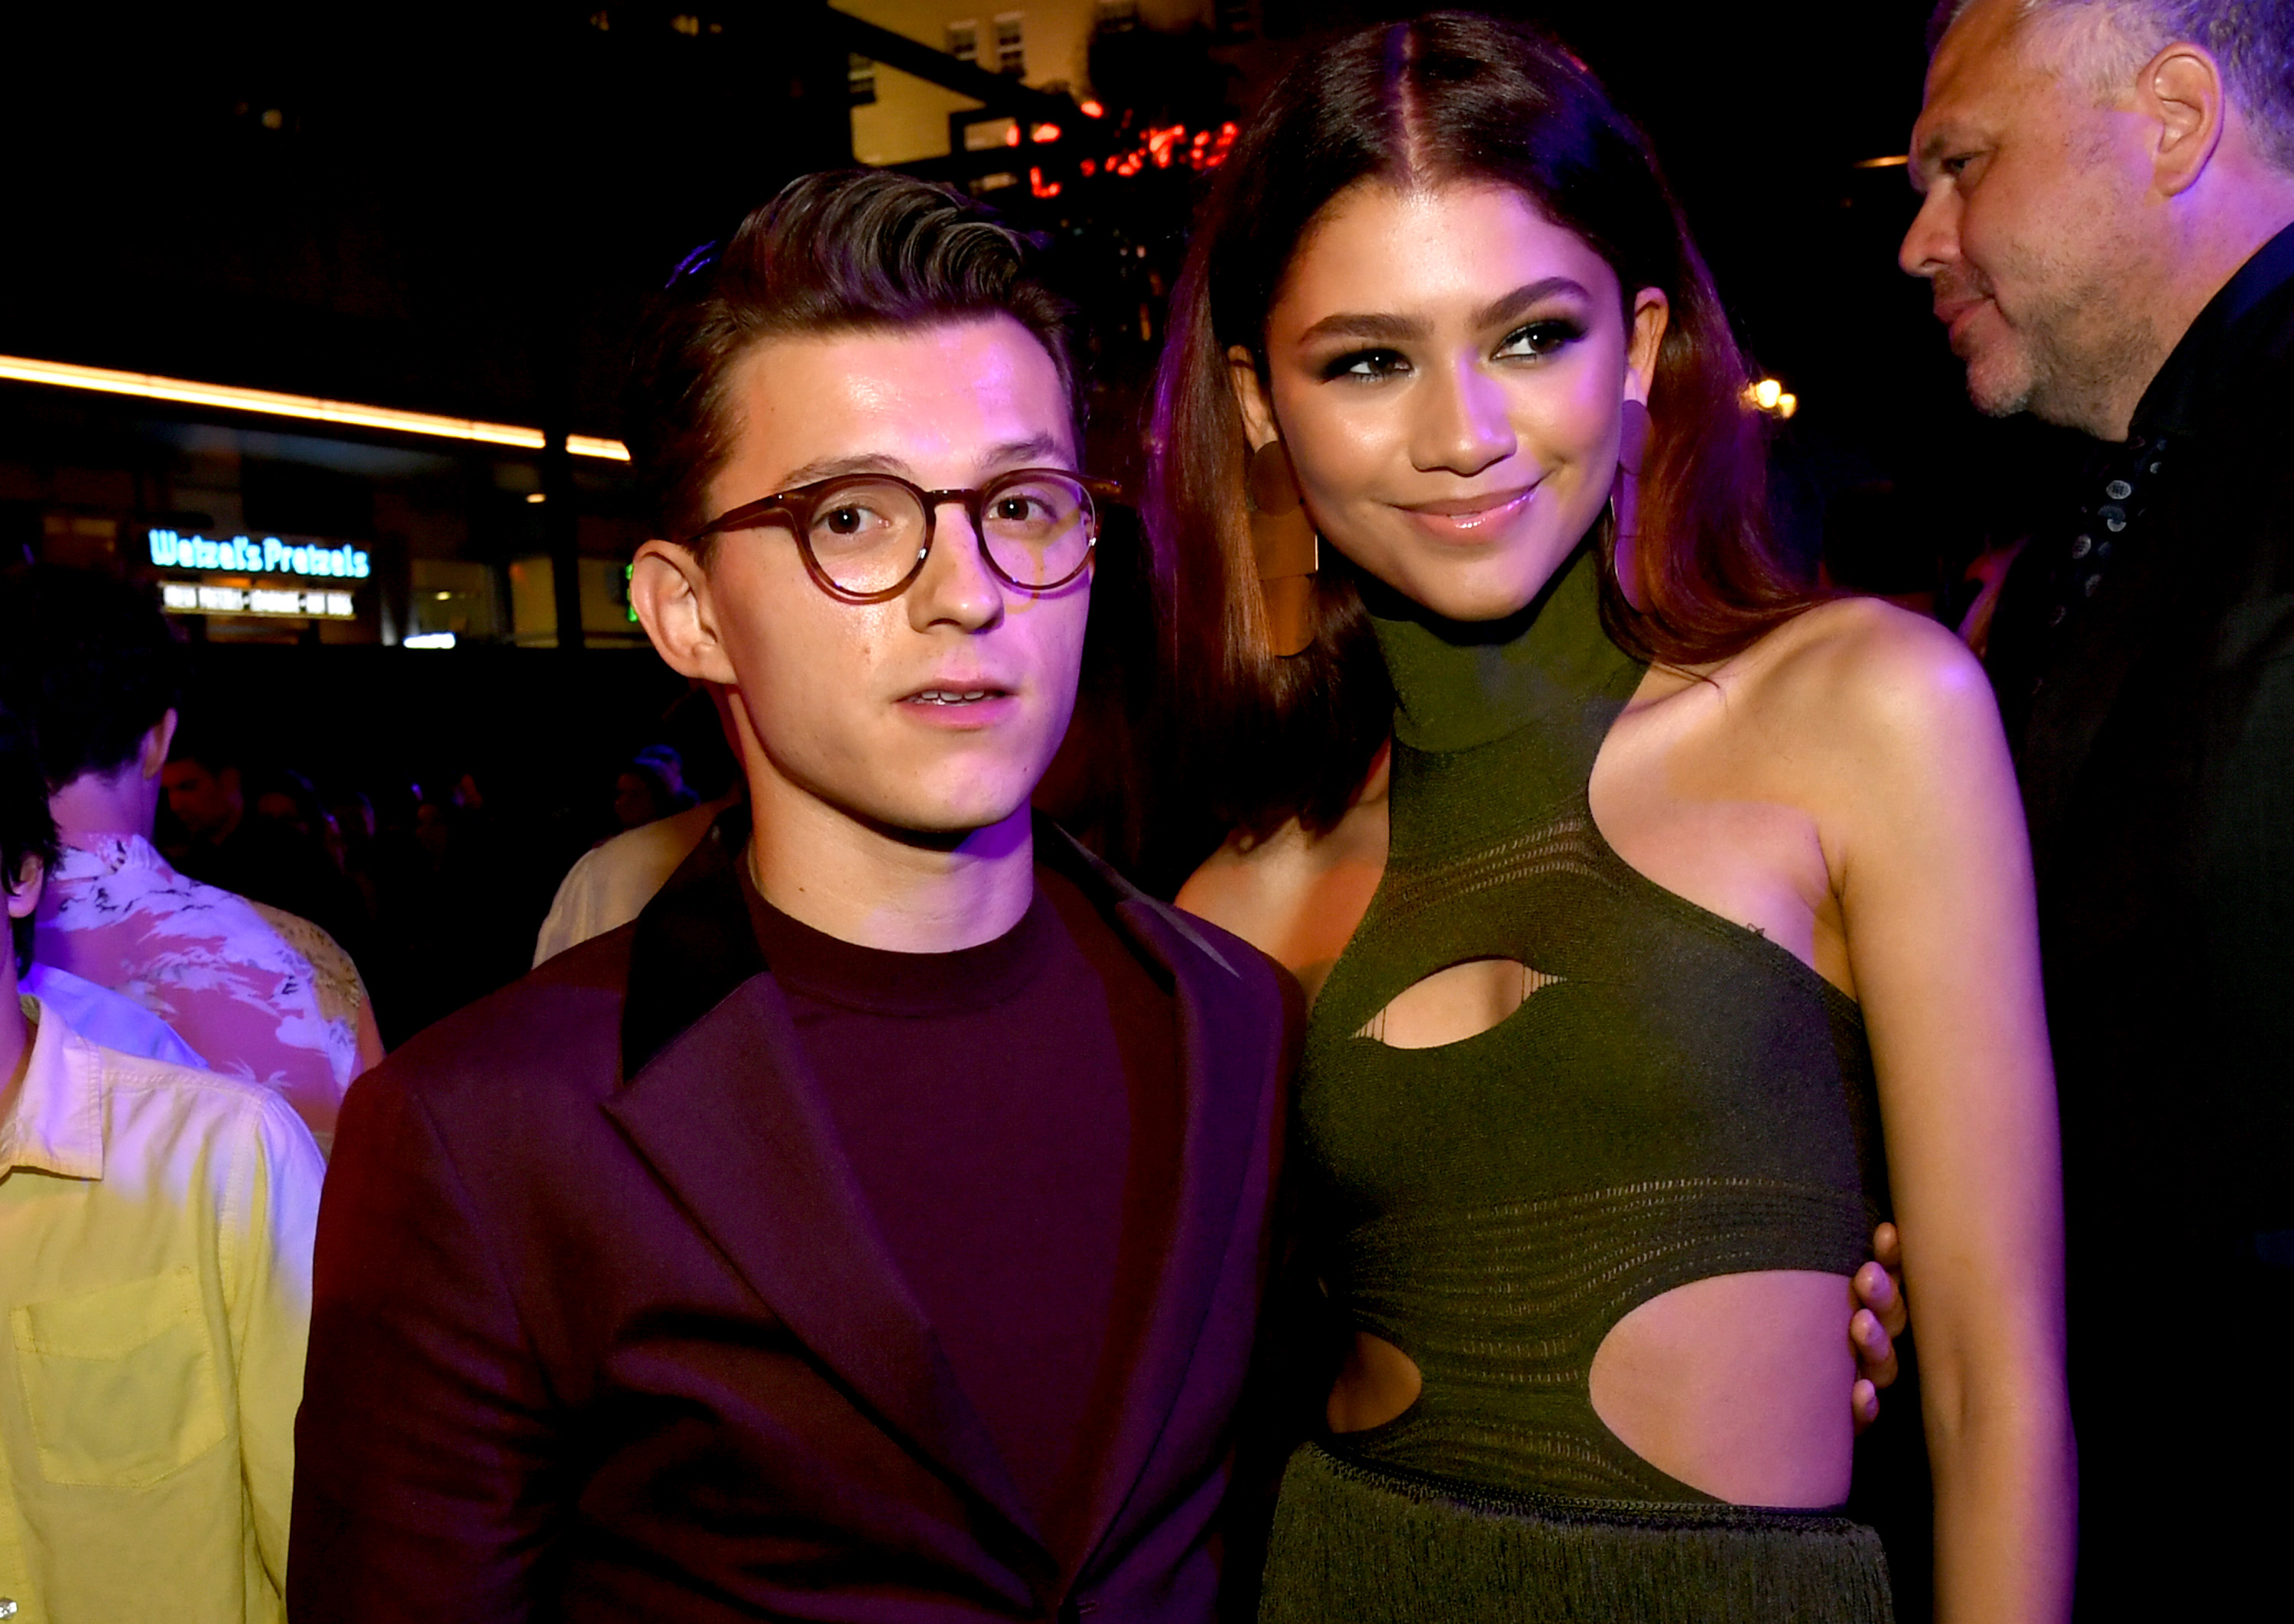 Tom Holland and Zendaya. He's wearing a brown suit and has his arm around her. She's wearing a green dress.